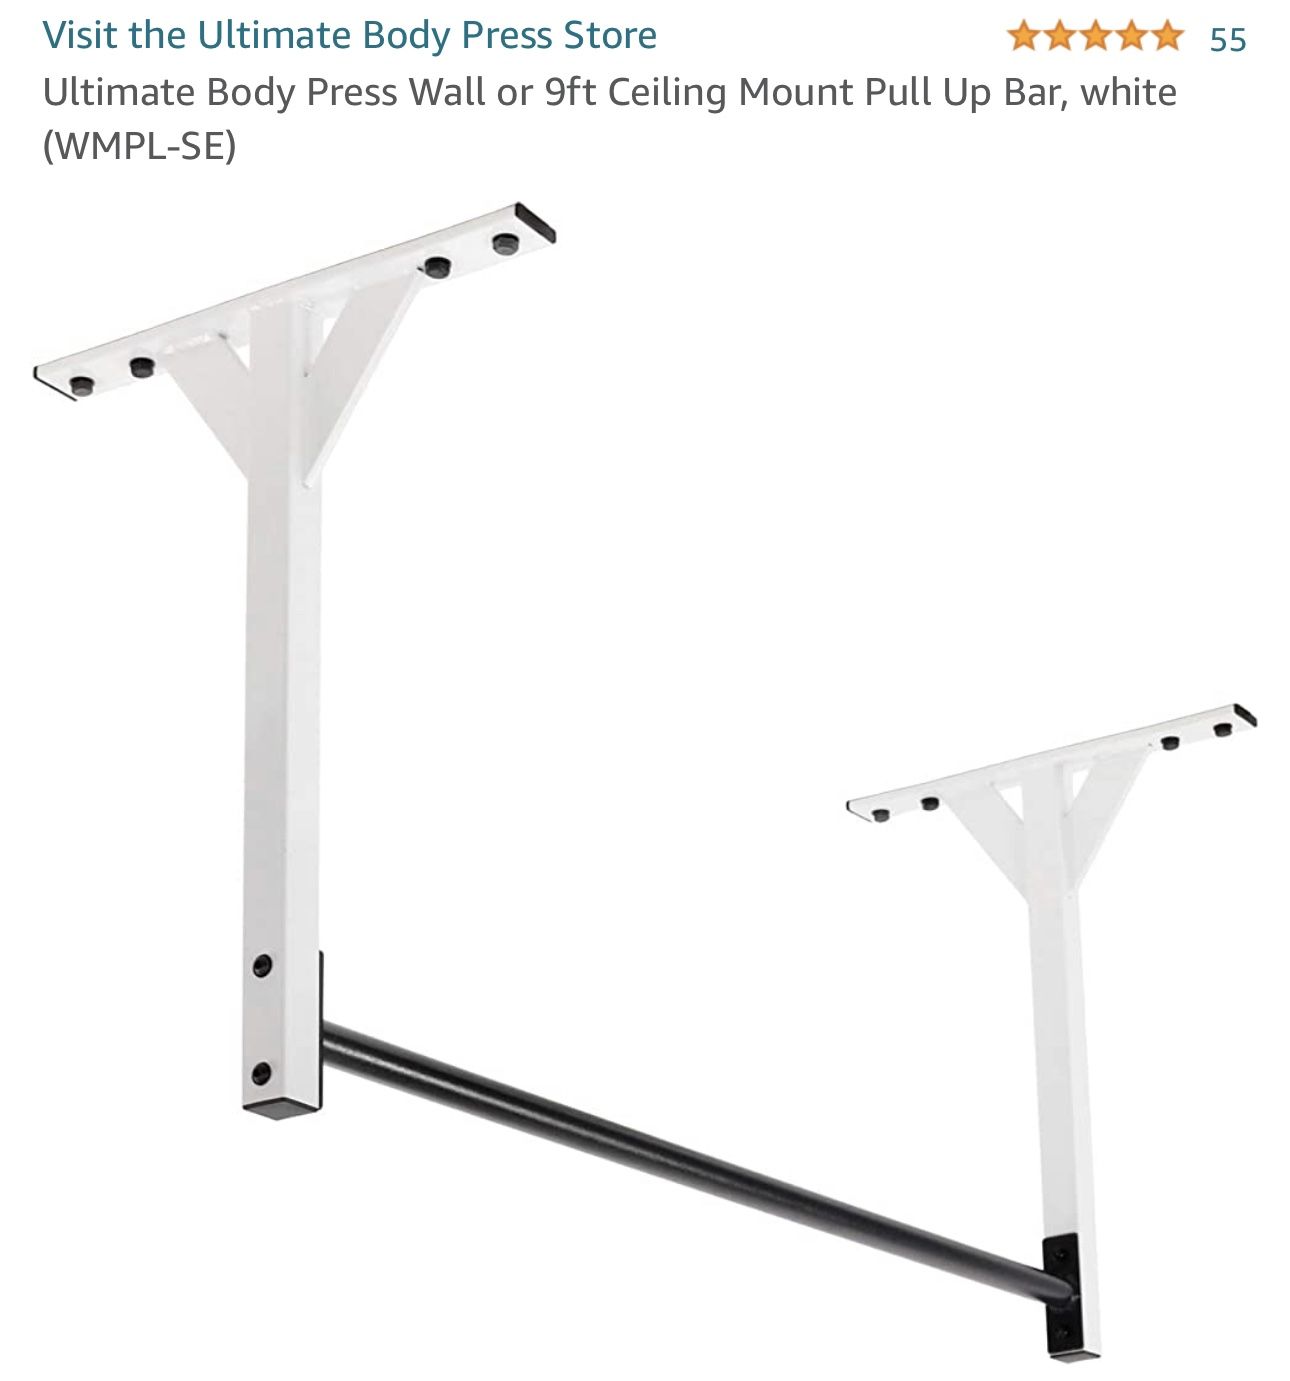 Ultimate Body Press Wall or 9’ Ceiling Mount Pull Up Bar